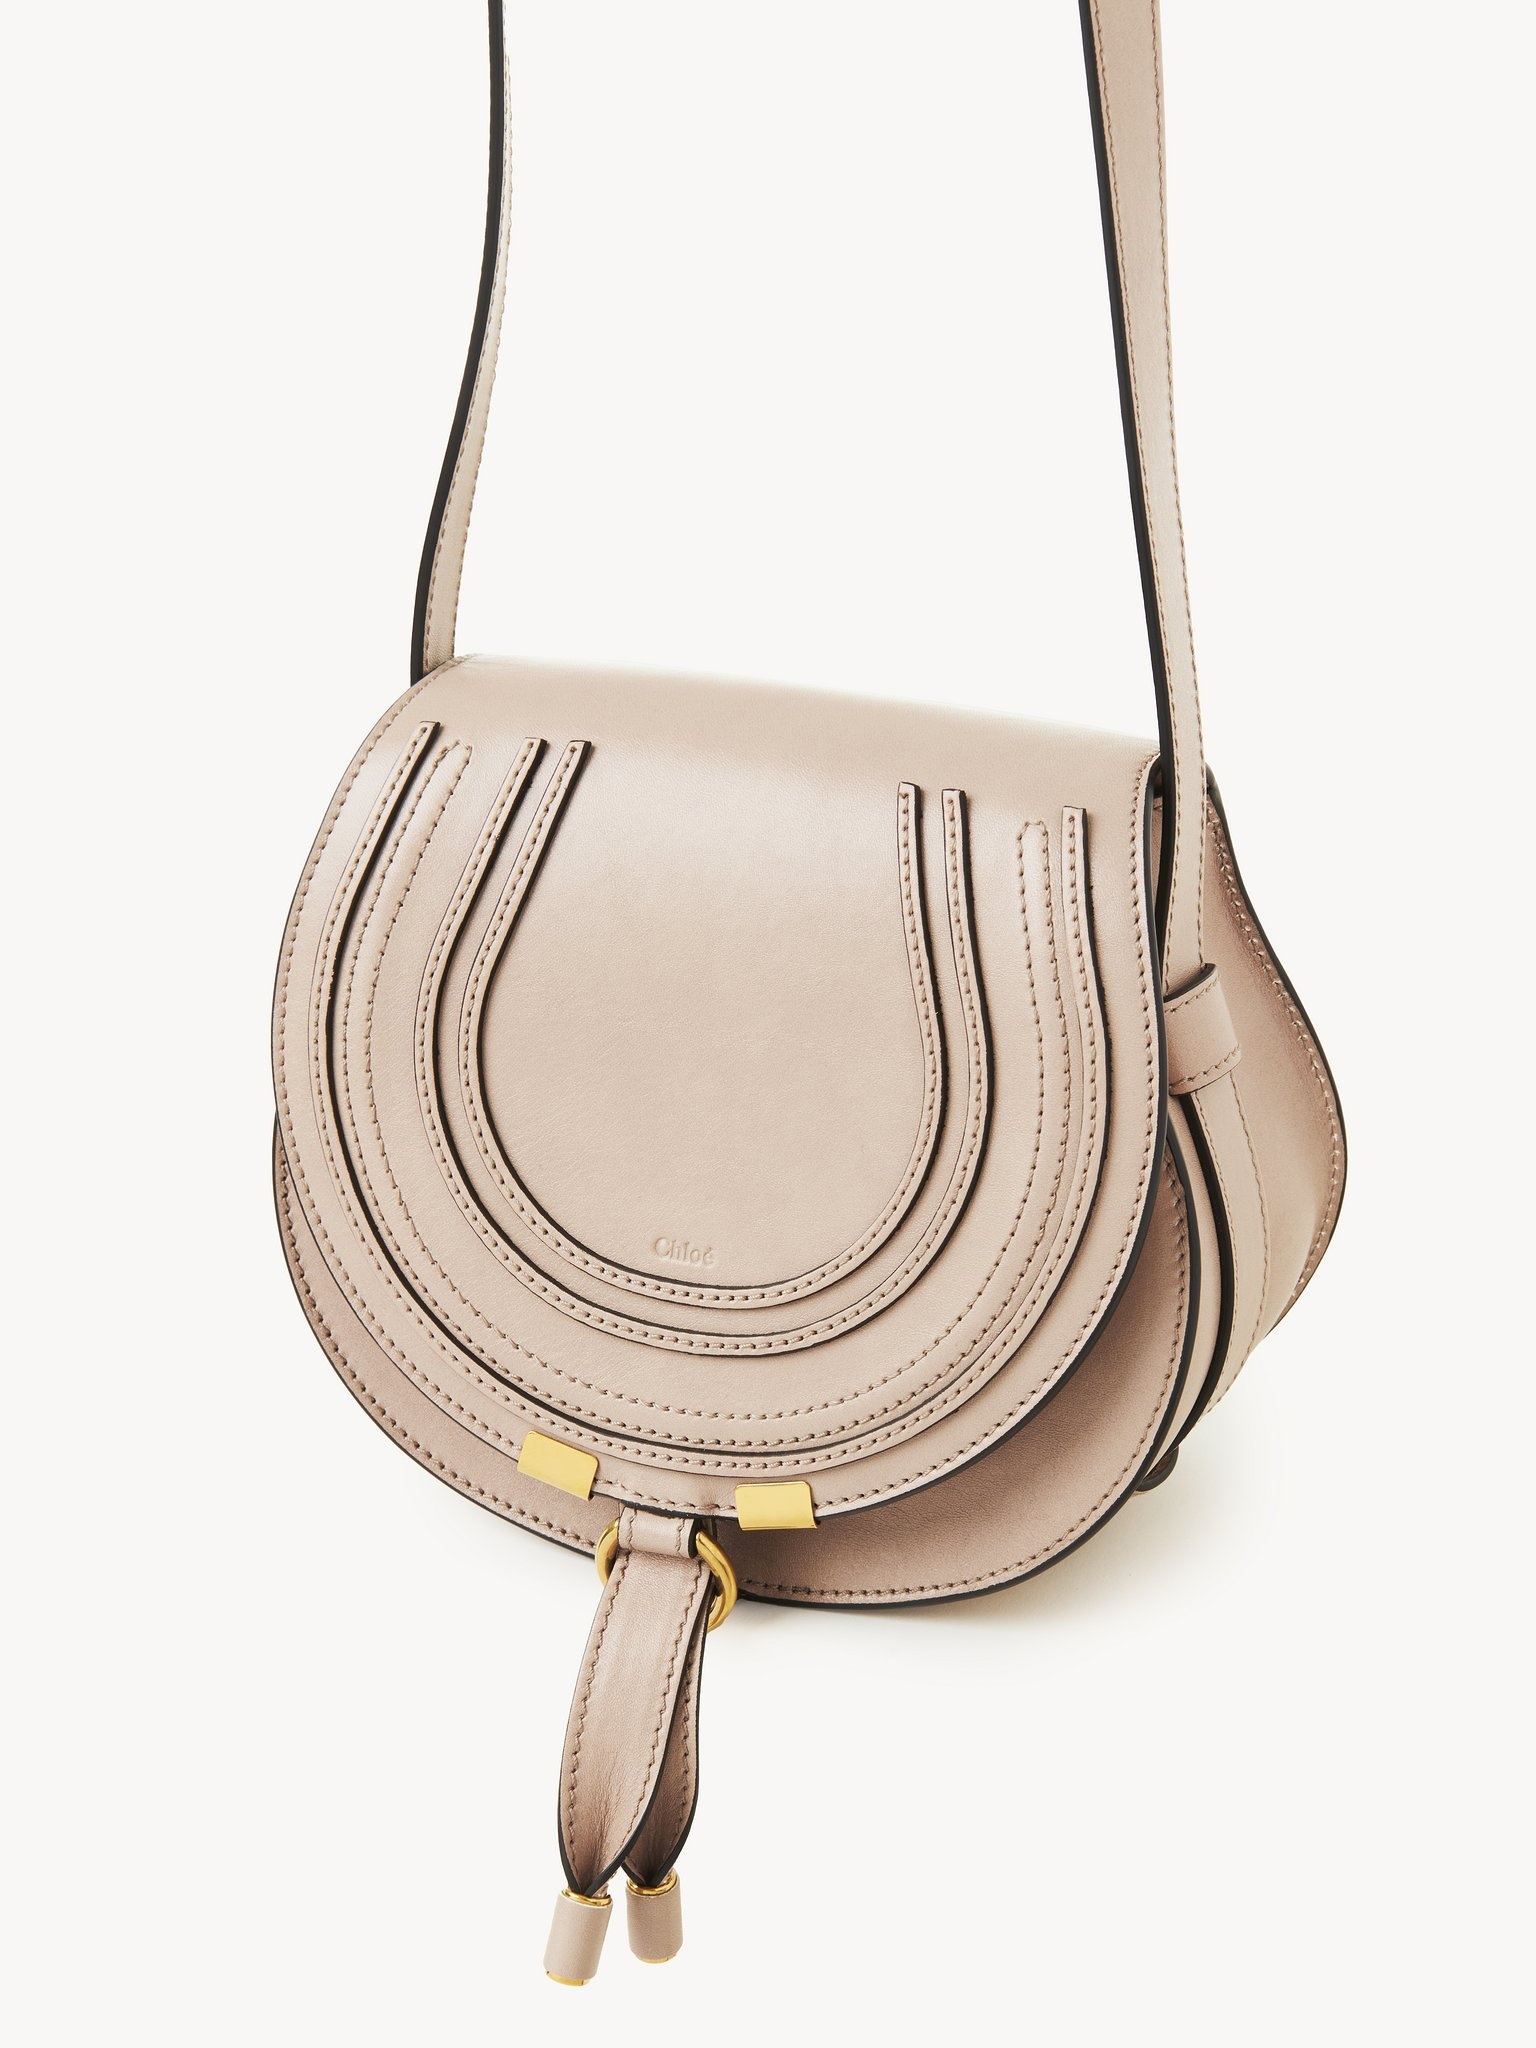 SMALL MARCIE SADDLE BAG IN SHINY LEATHER - 3